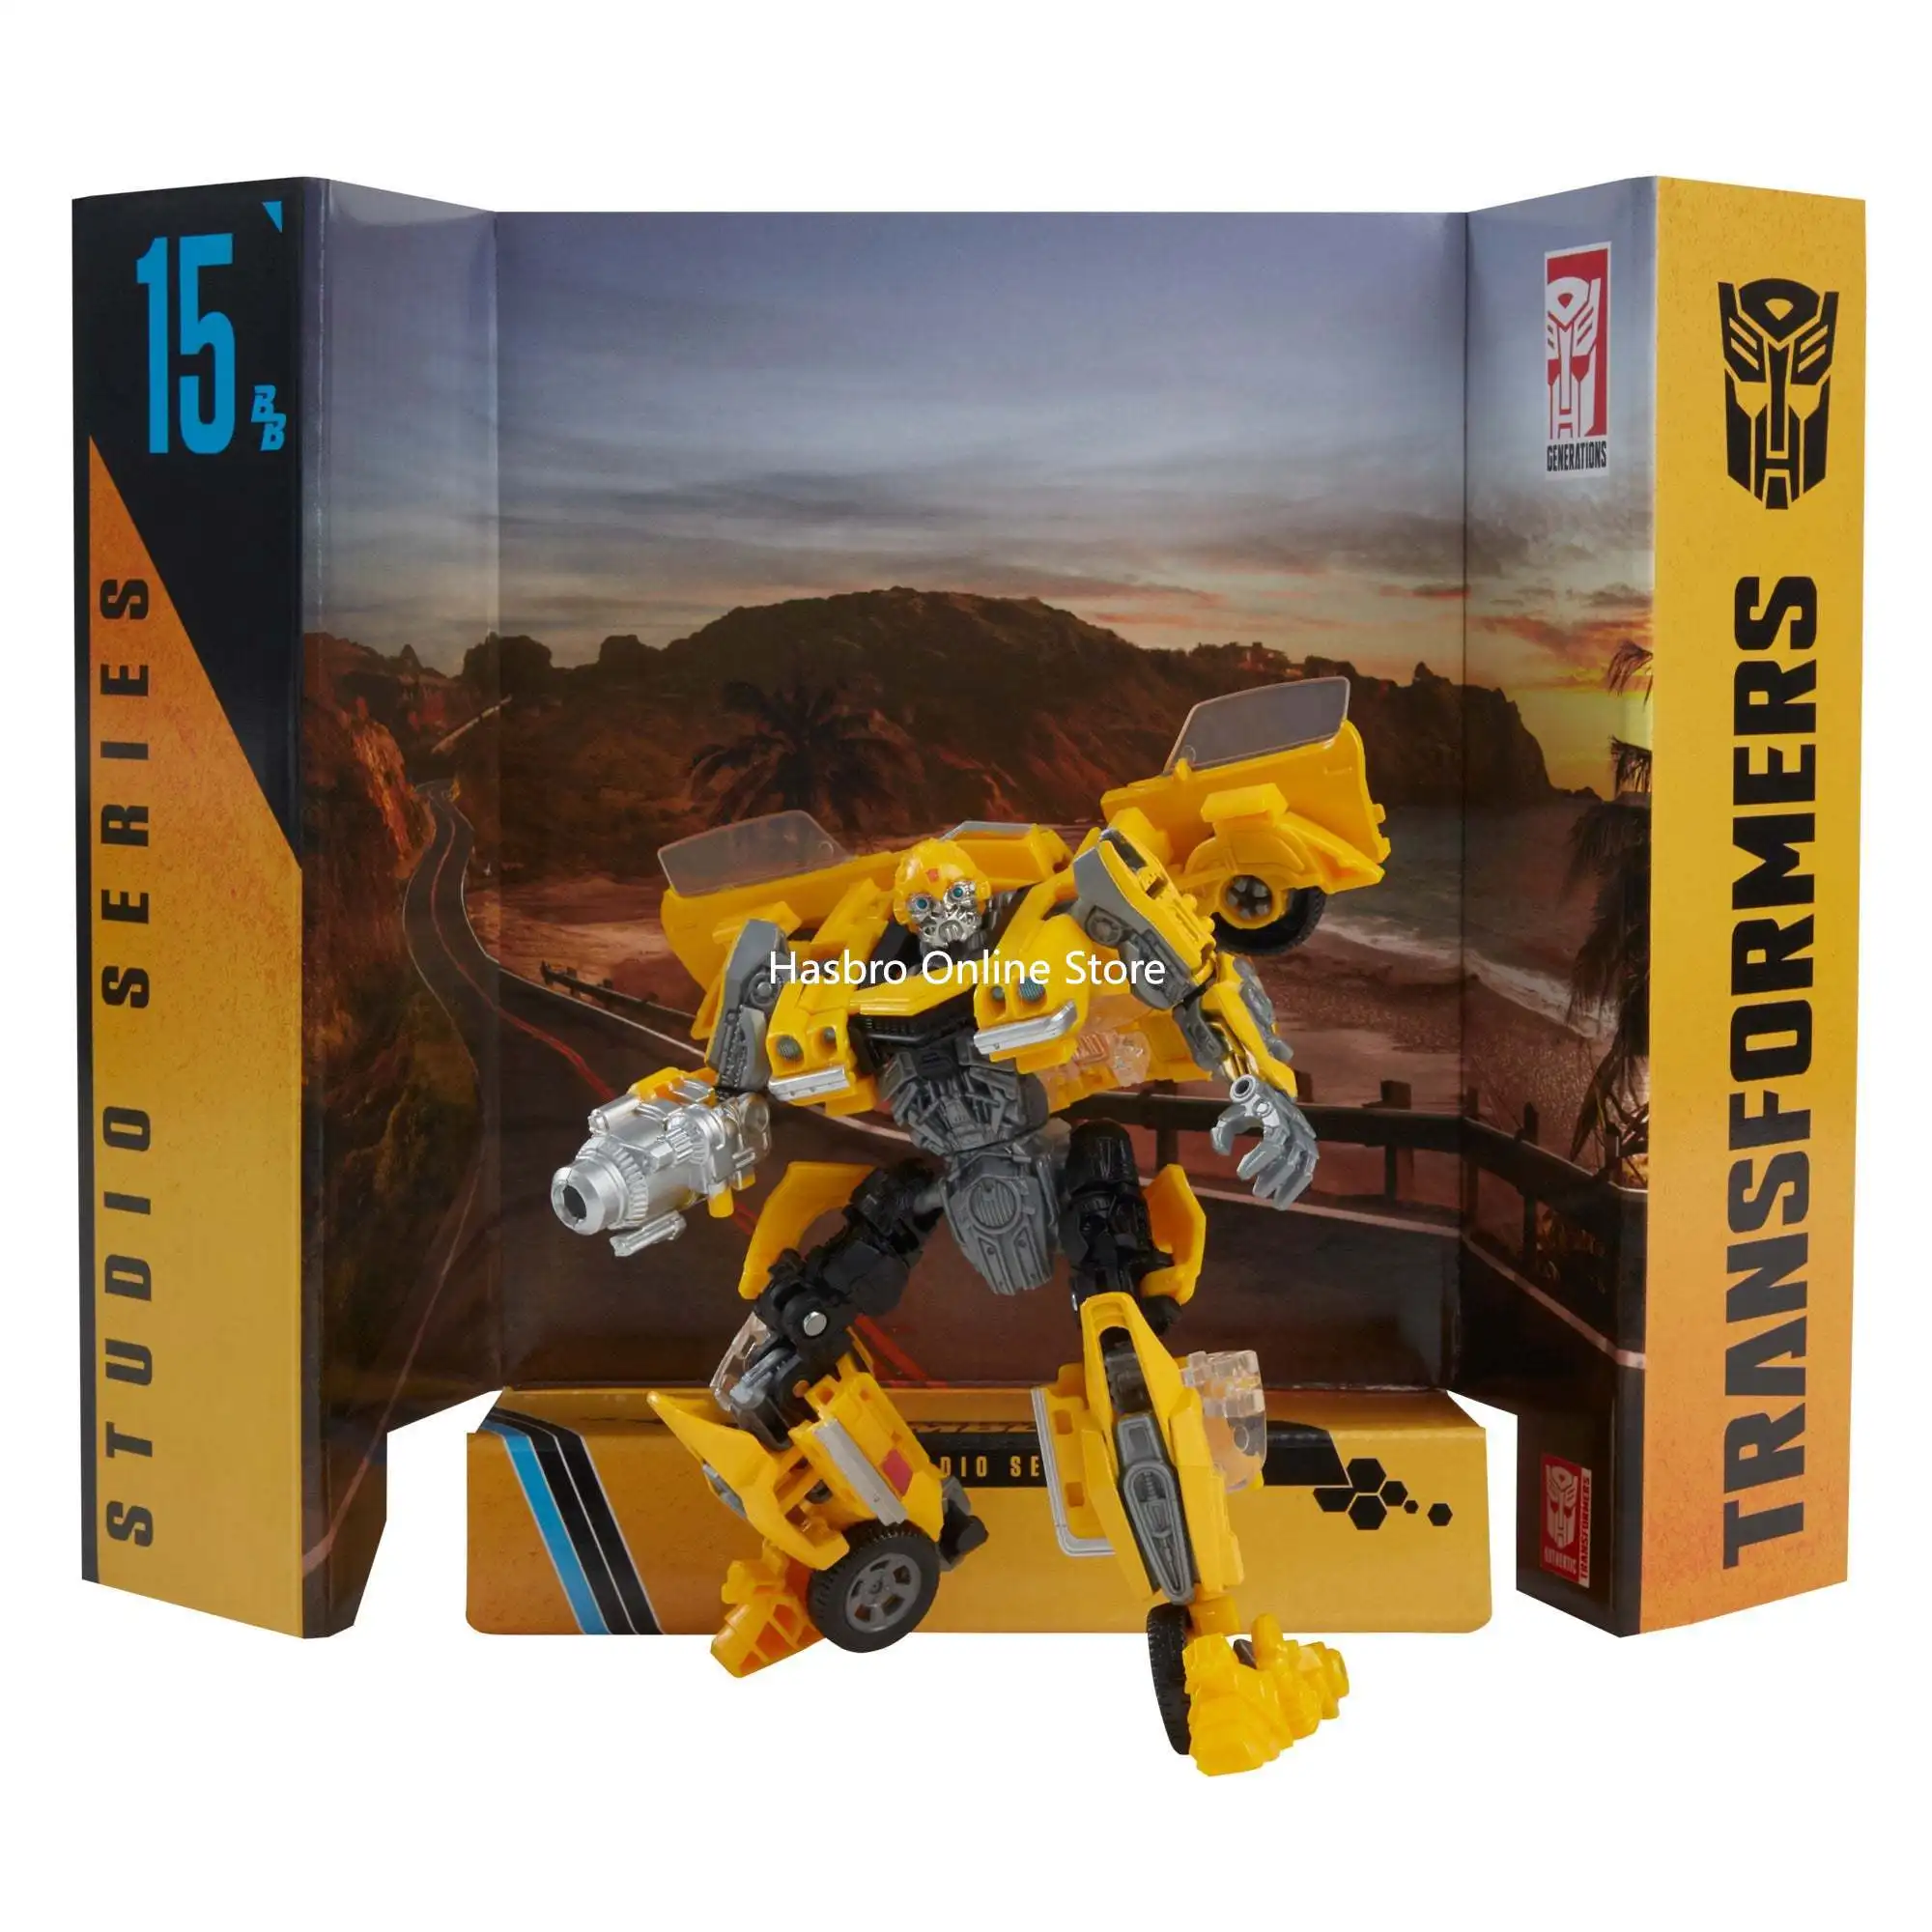 Hasbro Transformers Buzzworthy Bumblebee Studio Series Deluxe Class 15BB  Deluxe Class 6inch Action Figure Toys for Gift F1282